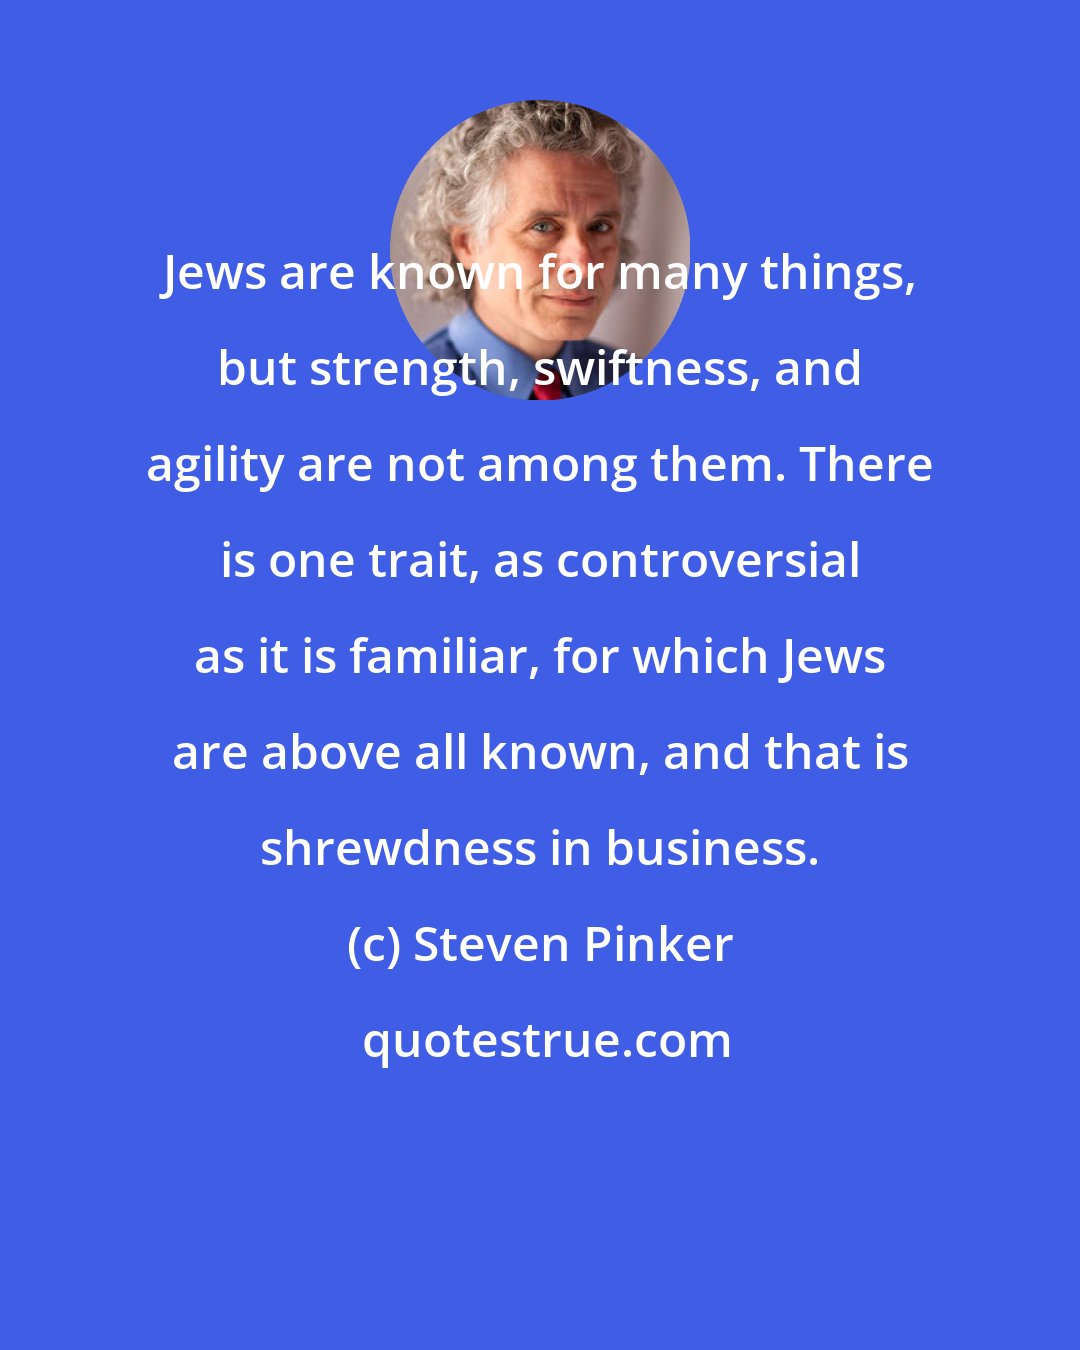 Steven Pinker: Jews are known for many things, but strength, swiftness, and agility are not among them. There is one trait, as controversial as it is familiar, for which Jews are above all known, and that is shrewdness in business.